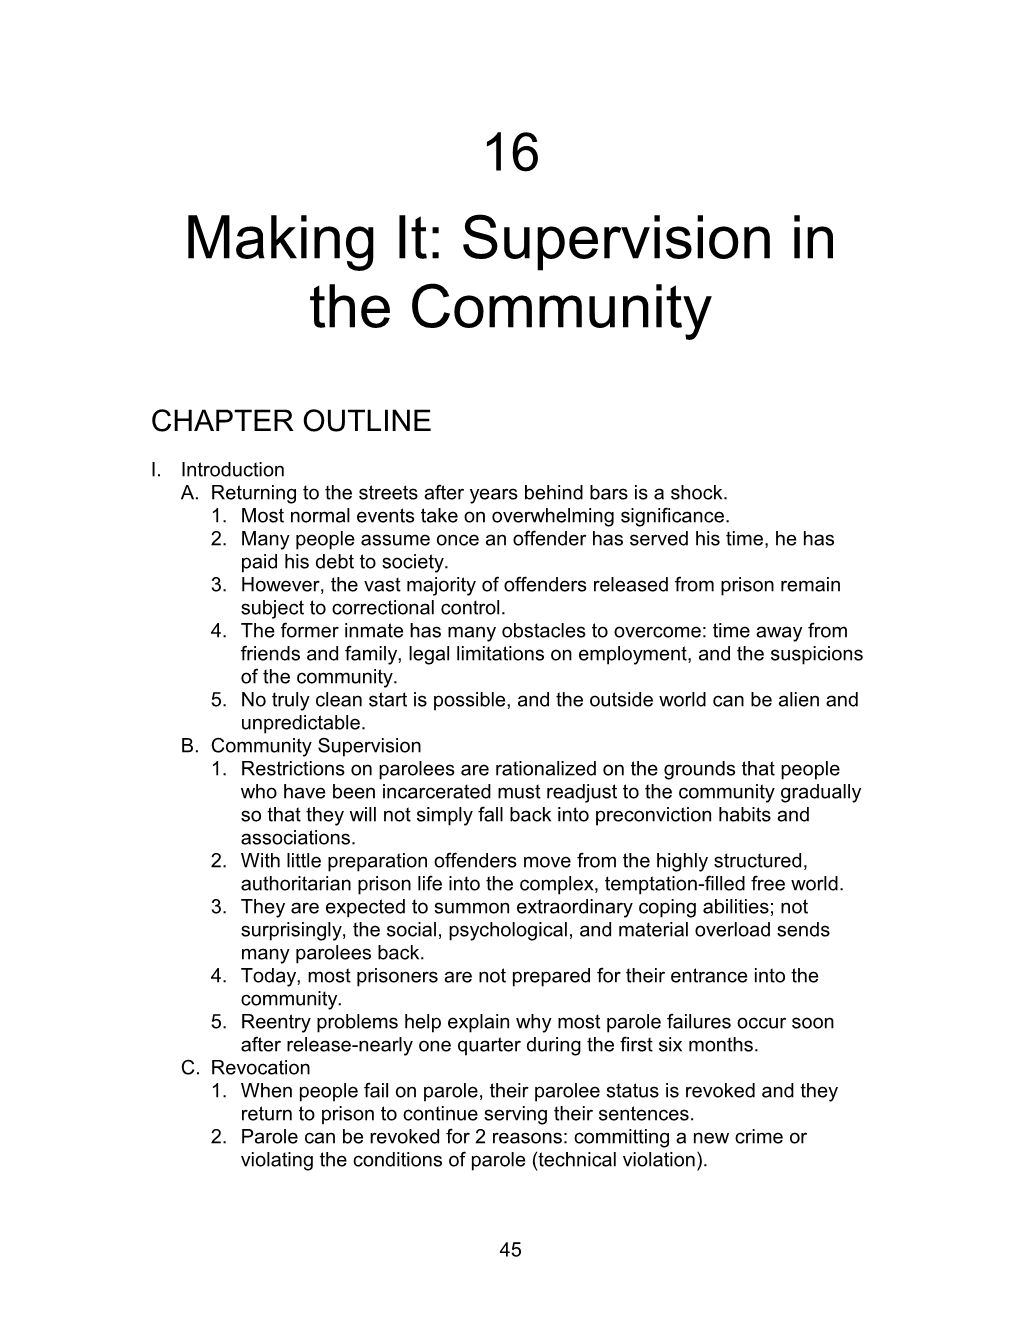 Making It: Supervision in the Community